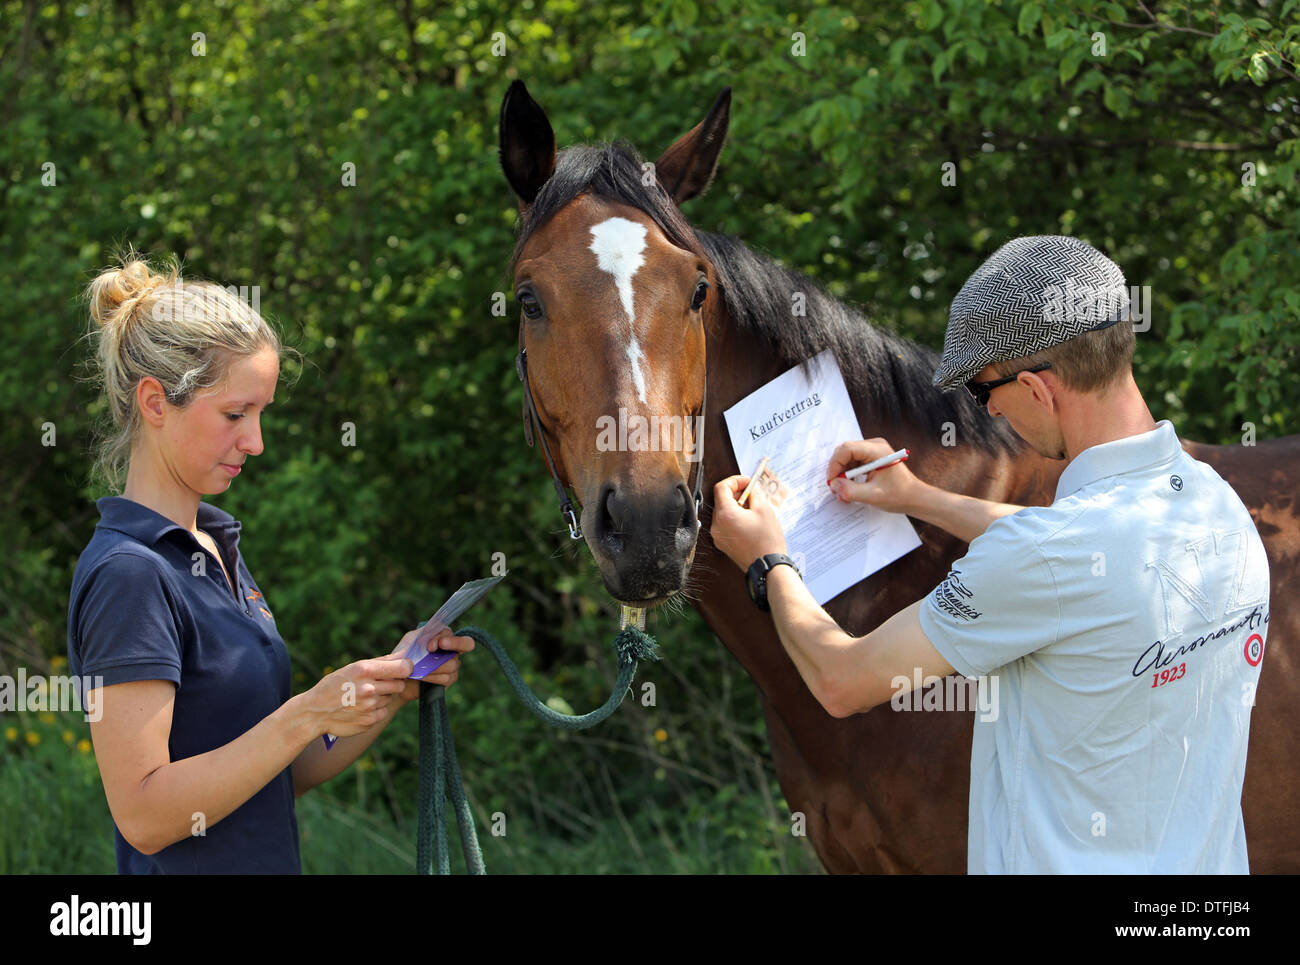 Koenigs Wusterhausen, Germany, man signed the purchase agreement for a horse Stock Photo